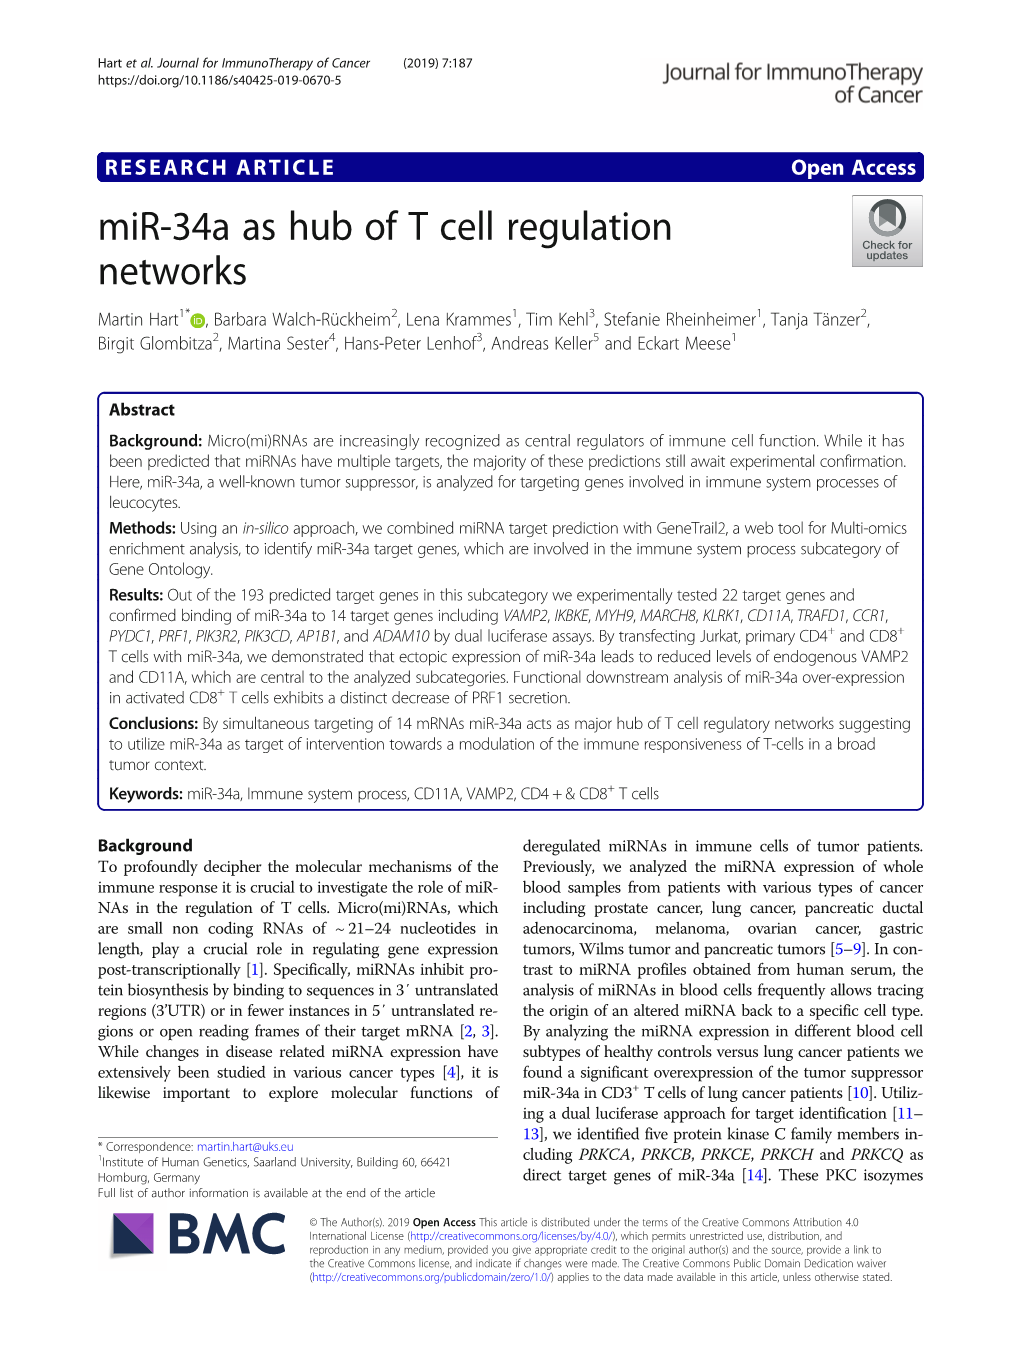 Mir-34A As Hub of T Cell Regulation Networks